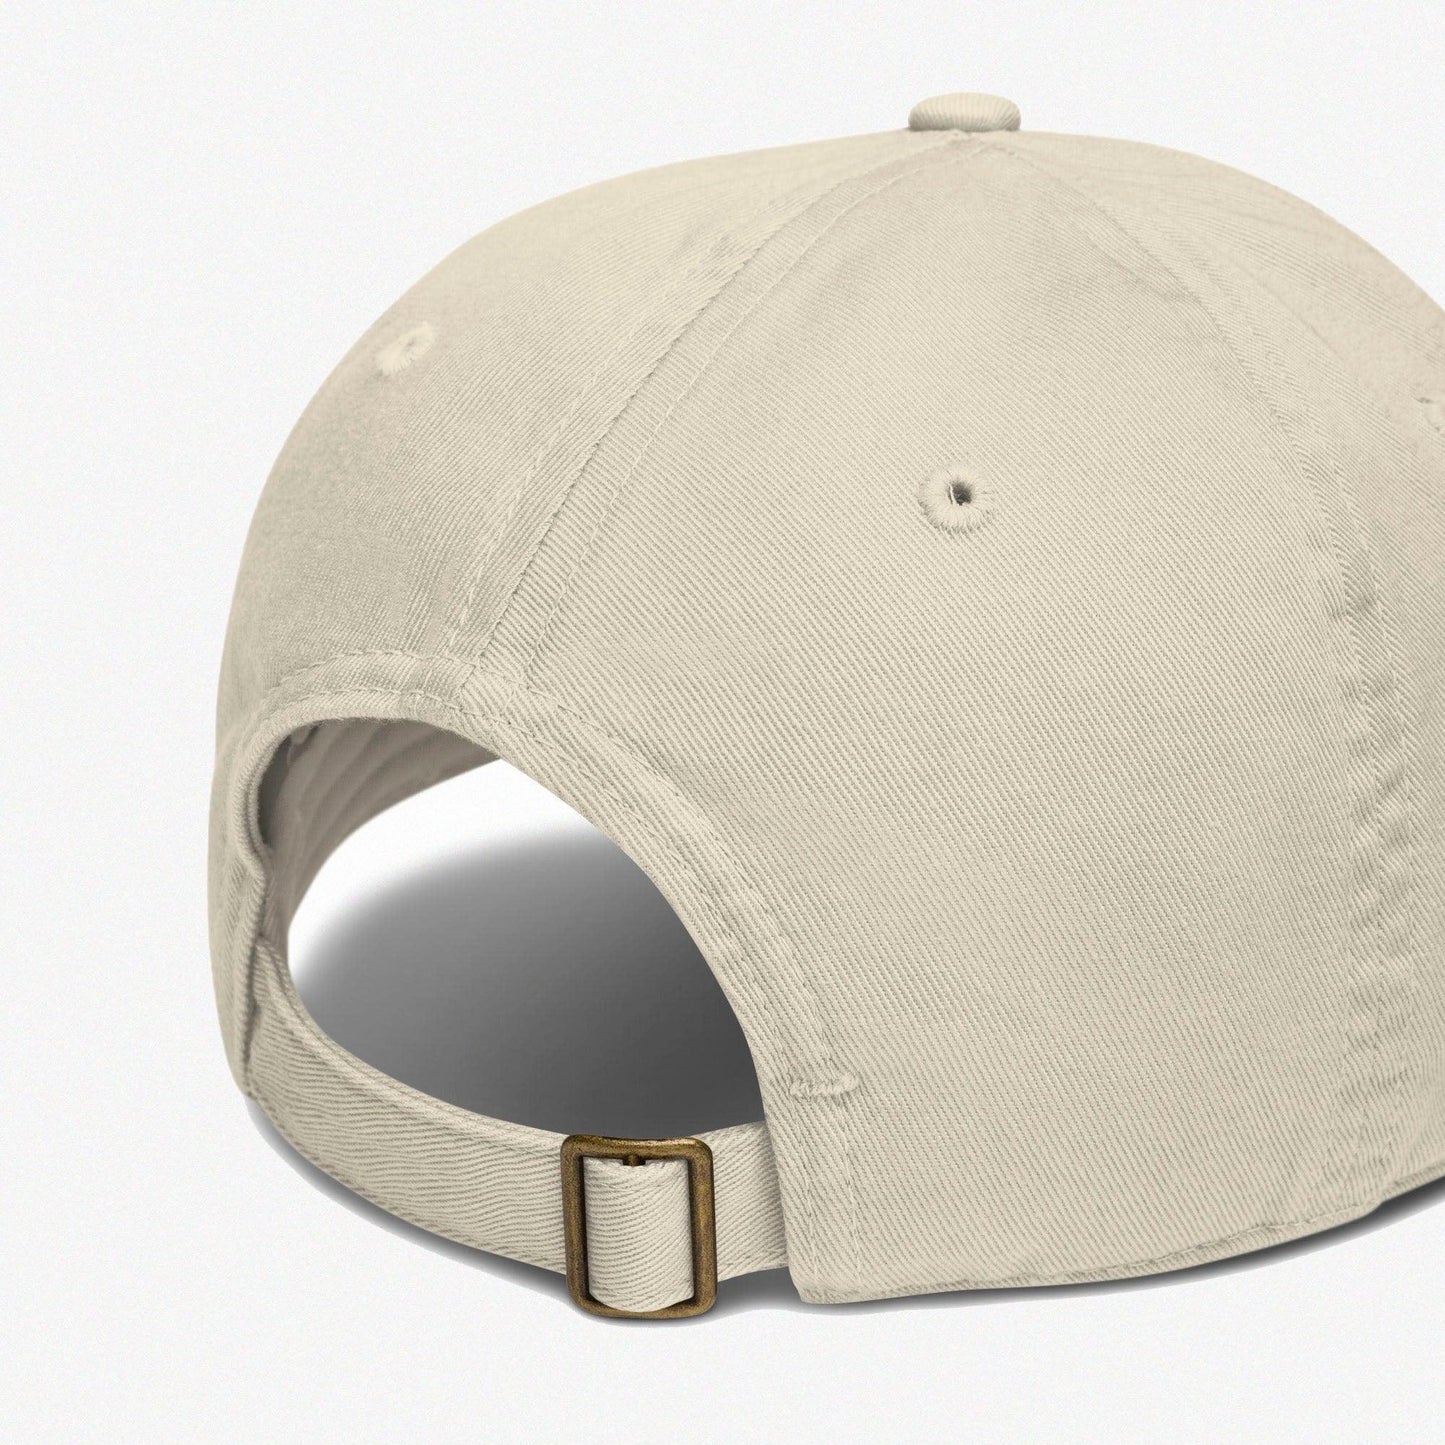 Beige Tennis Hat from the back, 6 panel hat, Organic cotton